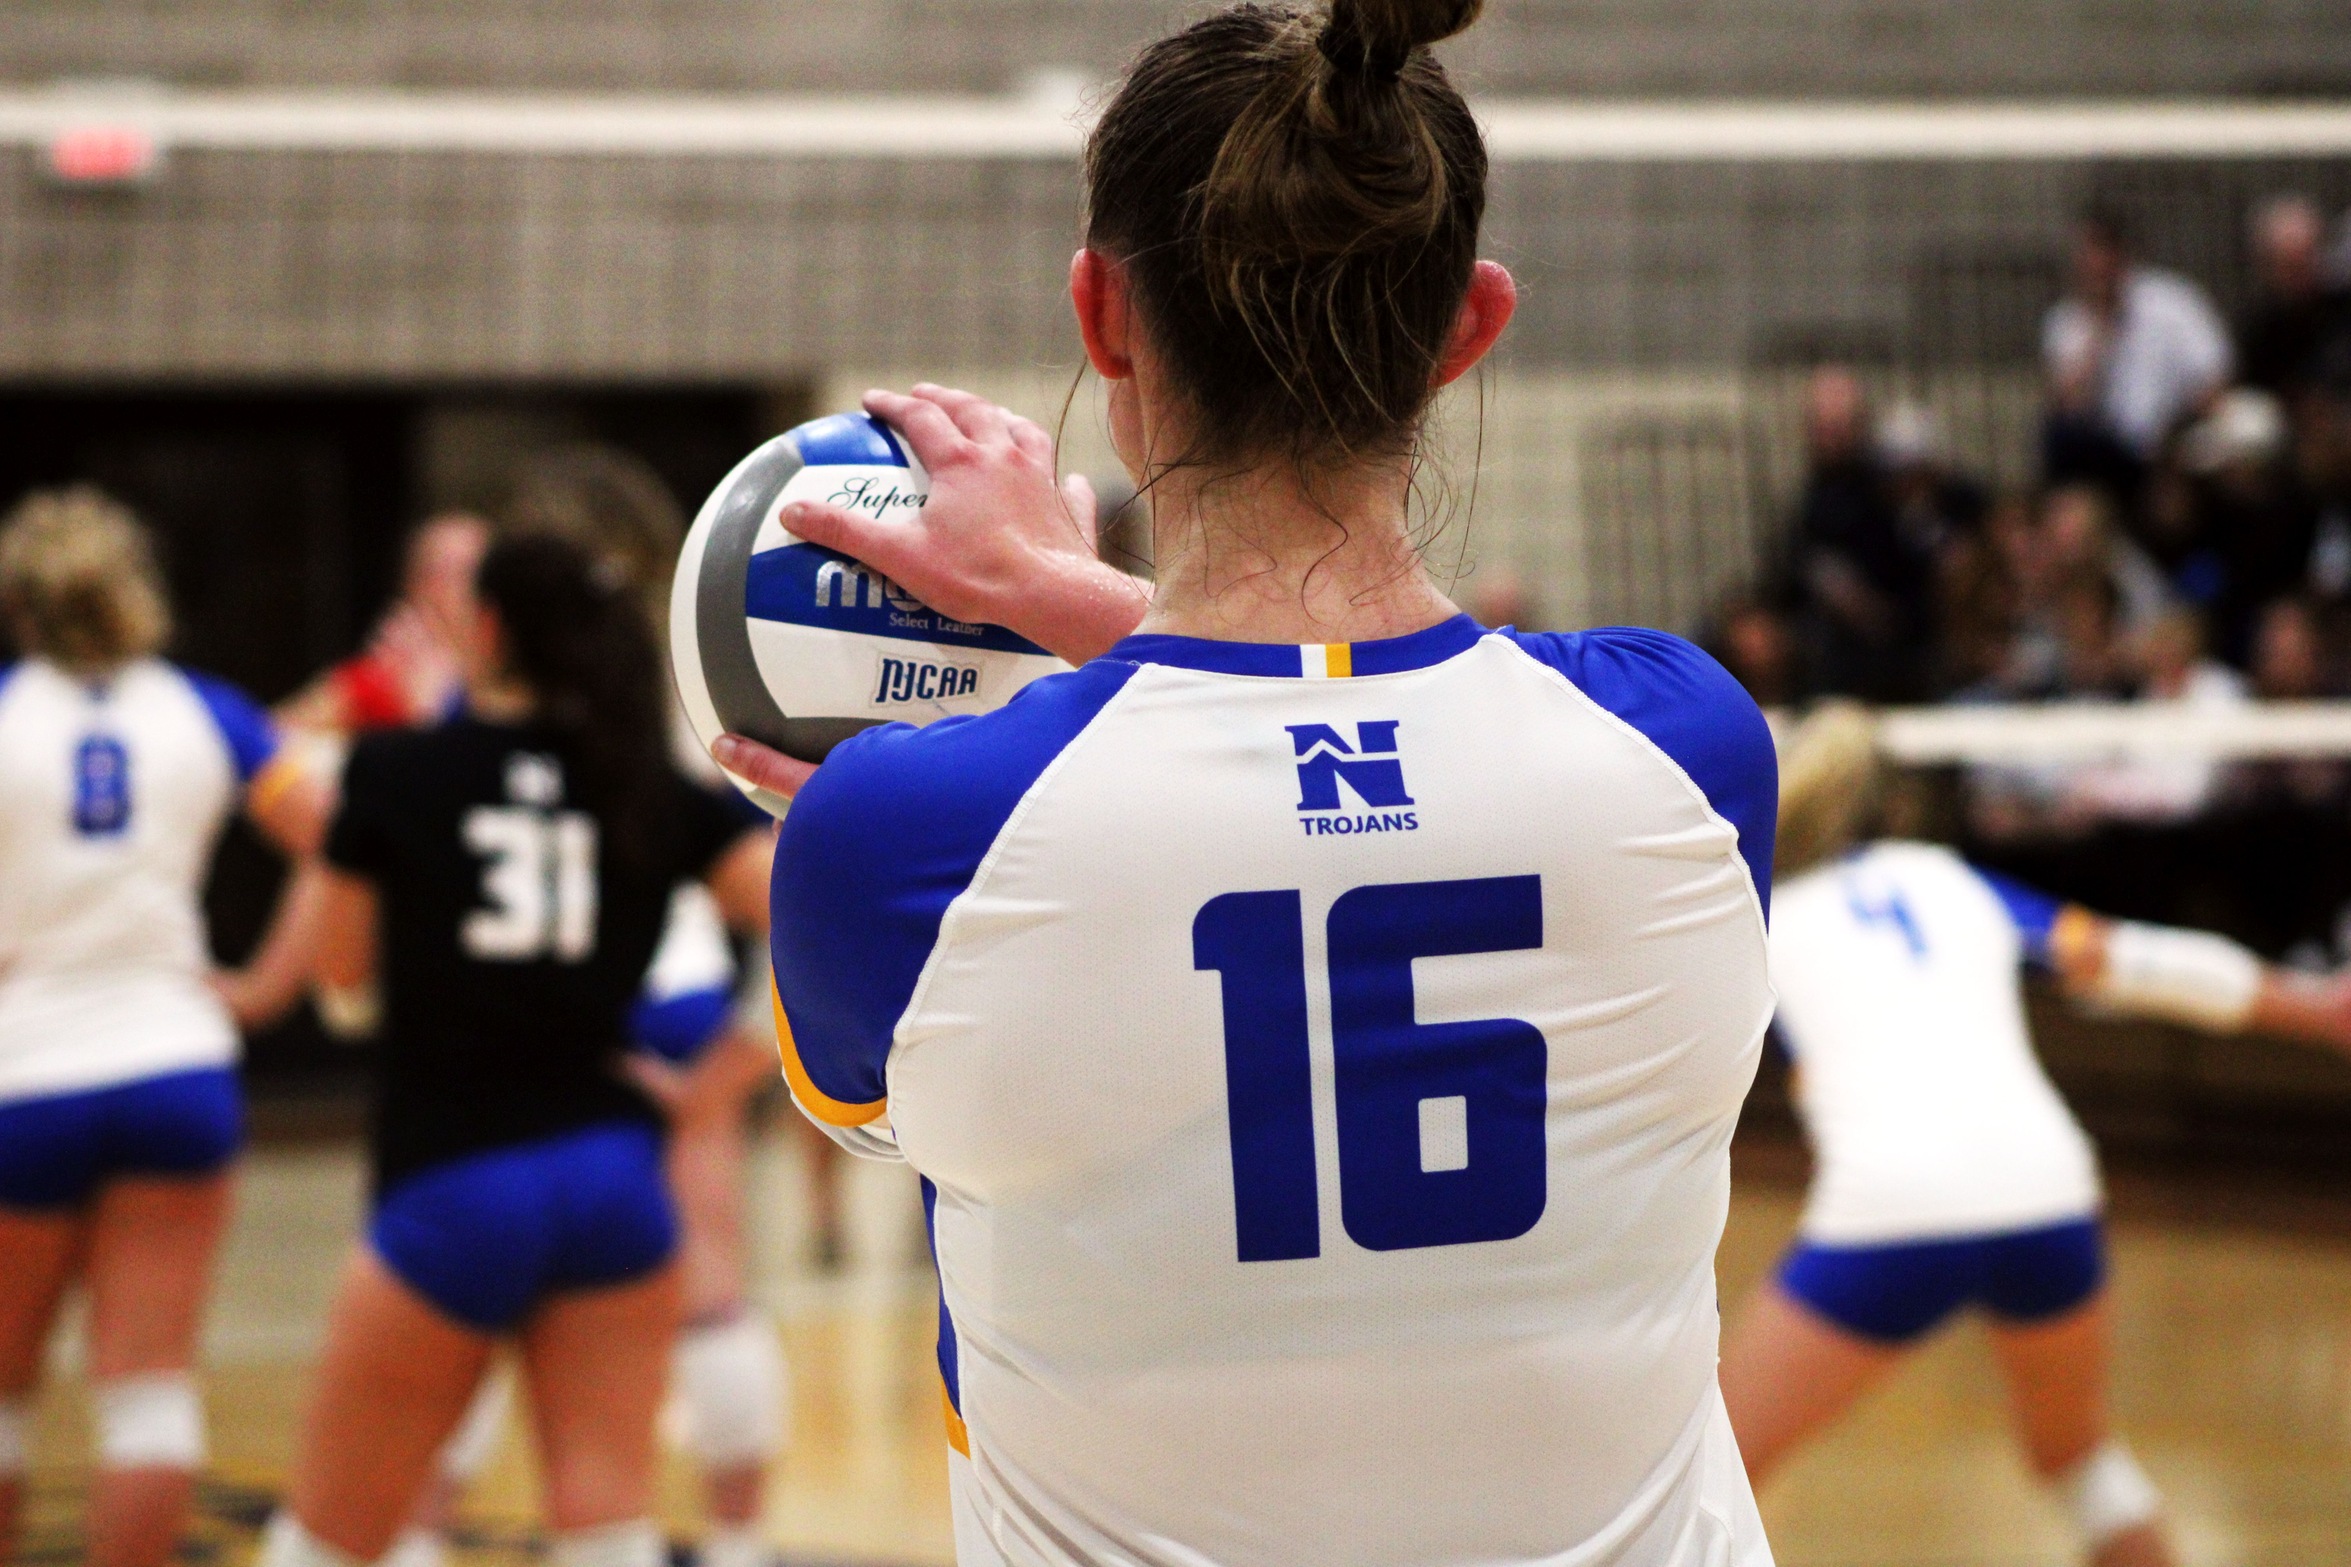 NIACC's Tiegan Barkema gets set to serve in Wednesday's match against Northeast CC.